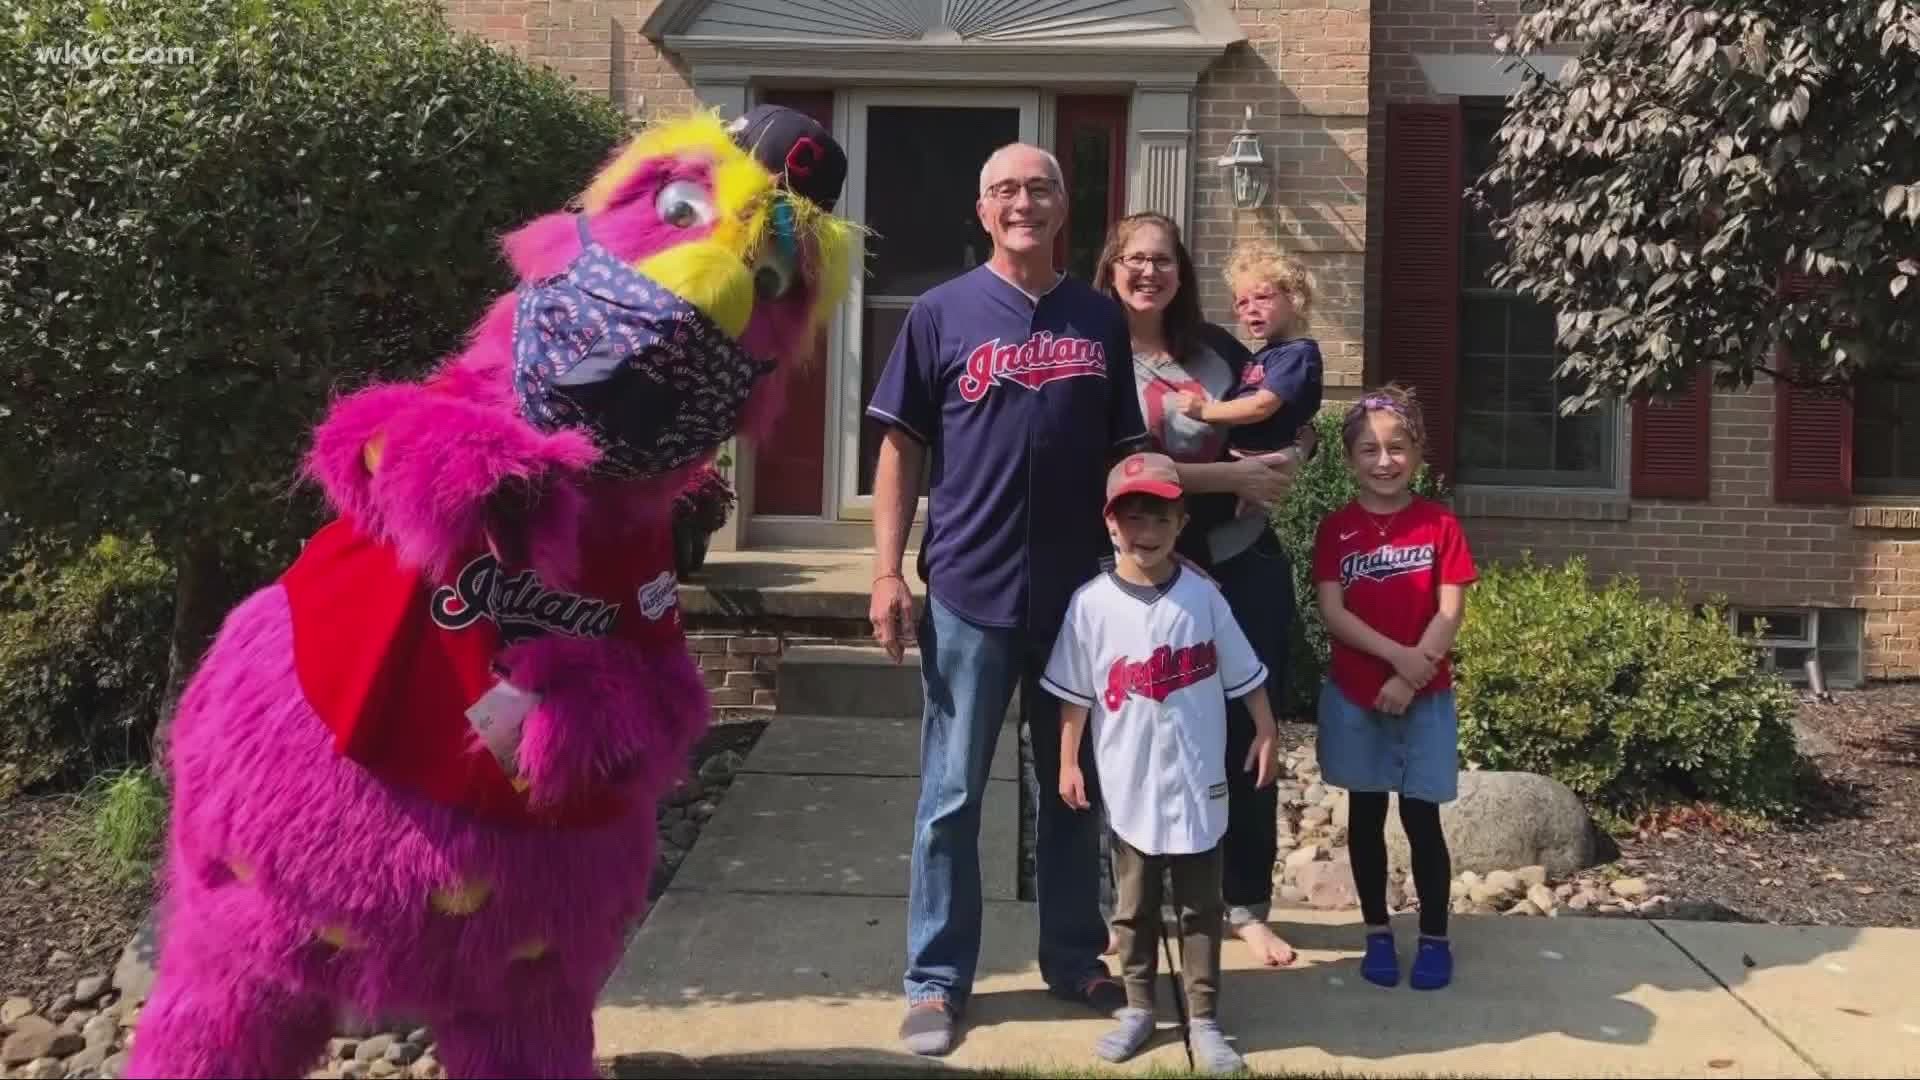 When the going gets tough, Indians fan are among the best in the league. Lindsay Buckingham introduces us to a grandfather that is sharing his love of baseball.